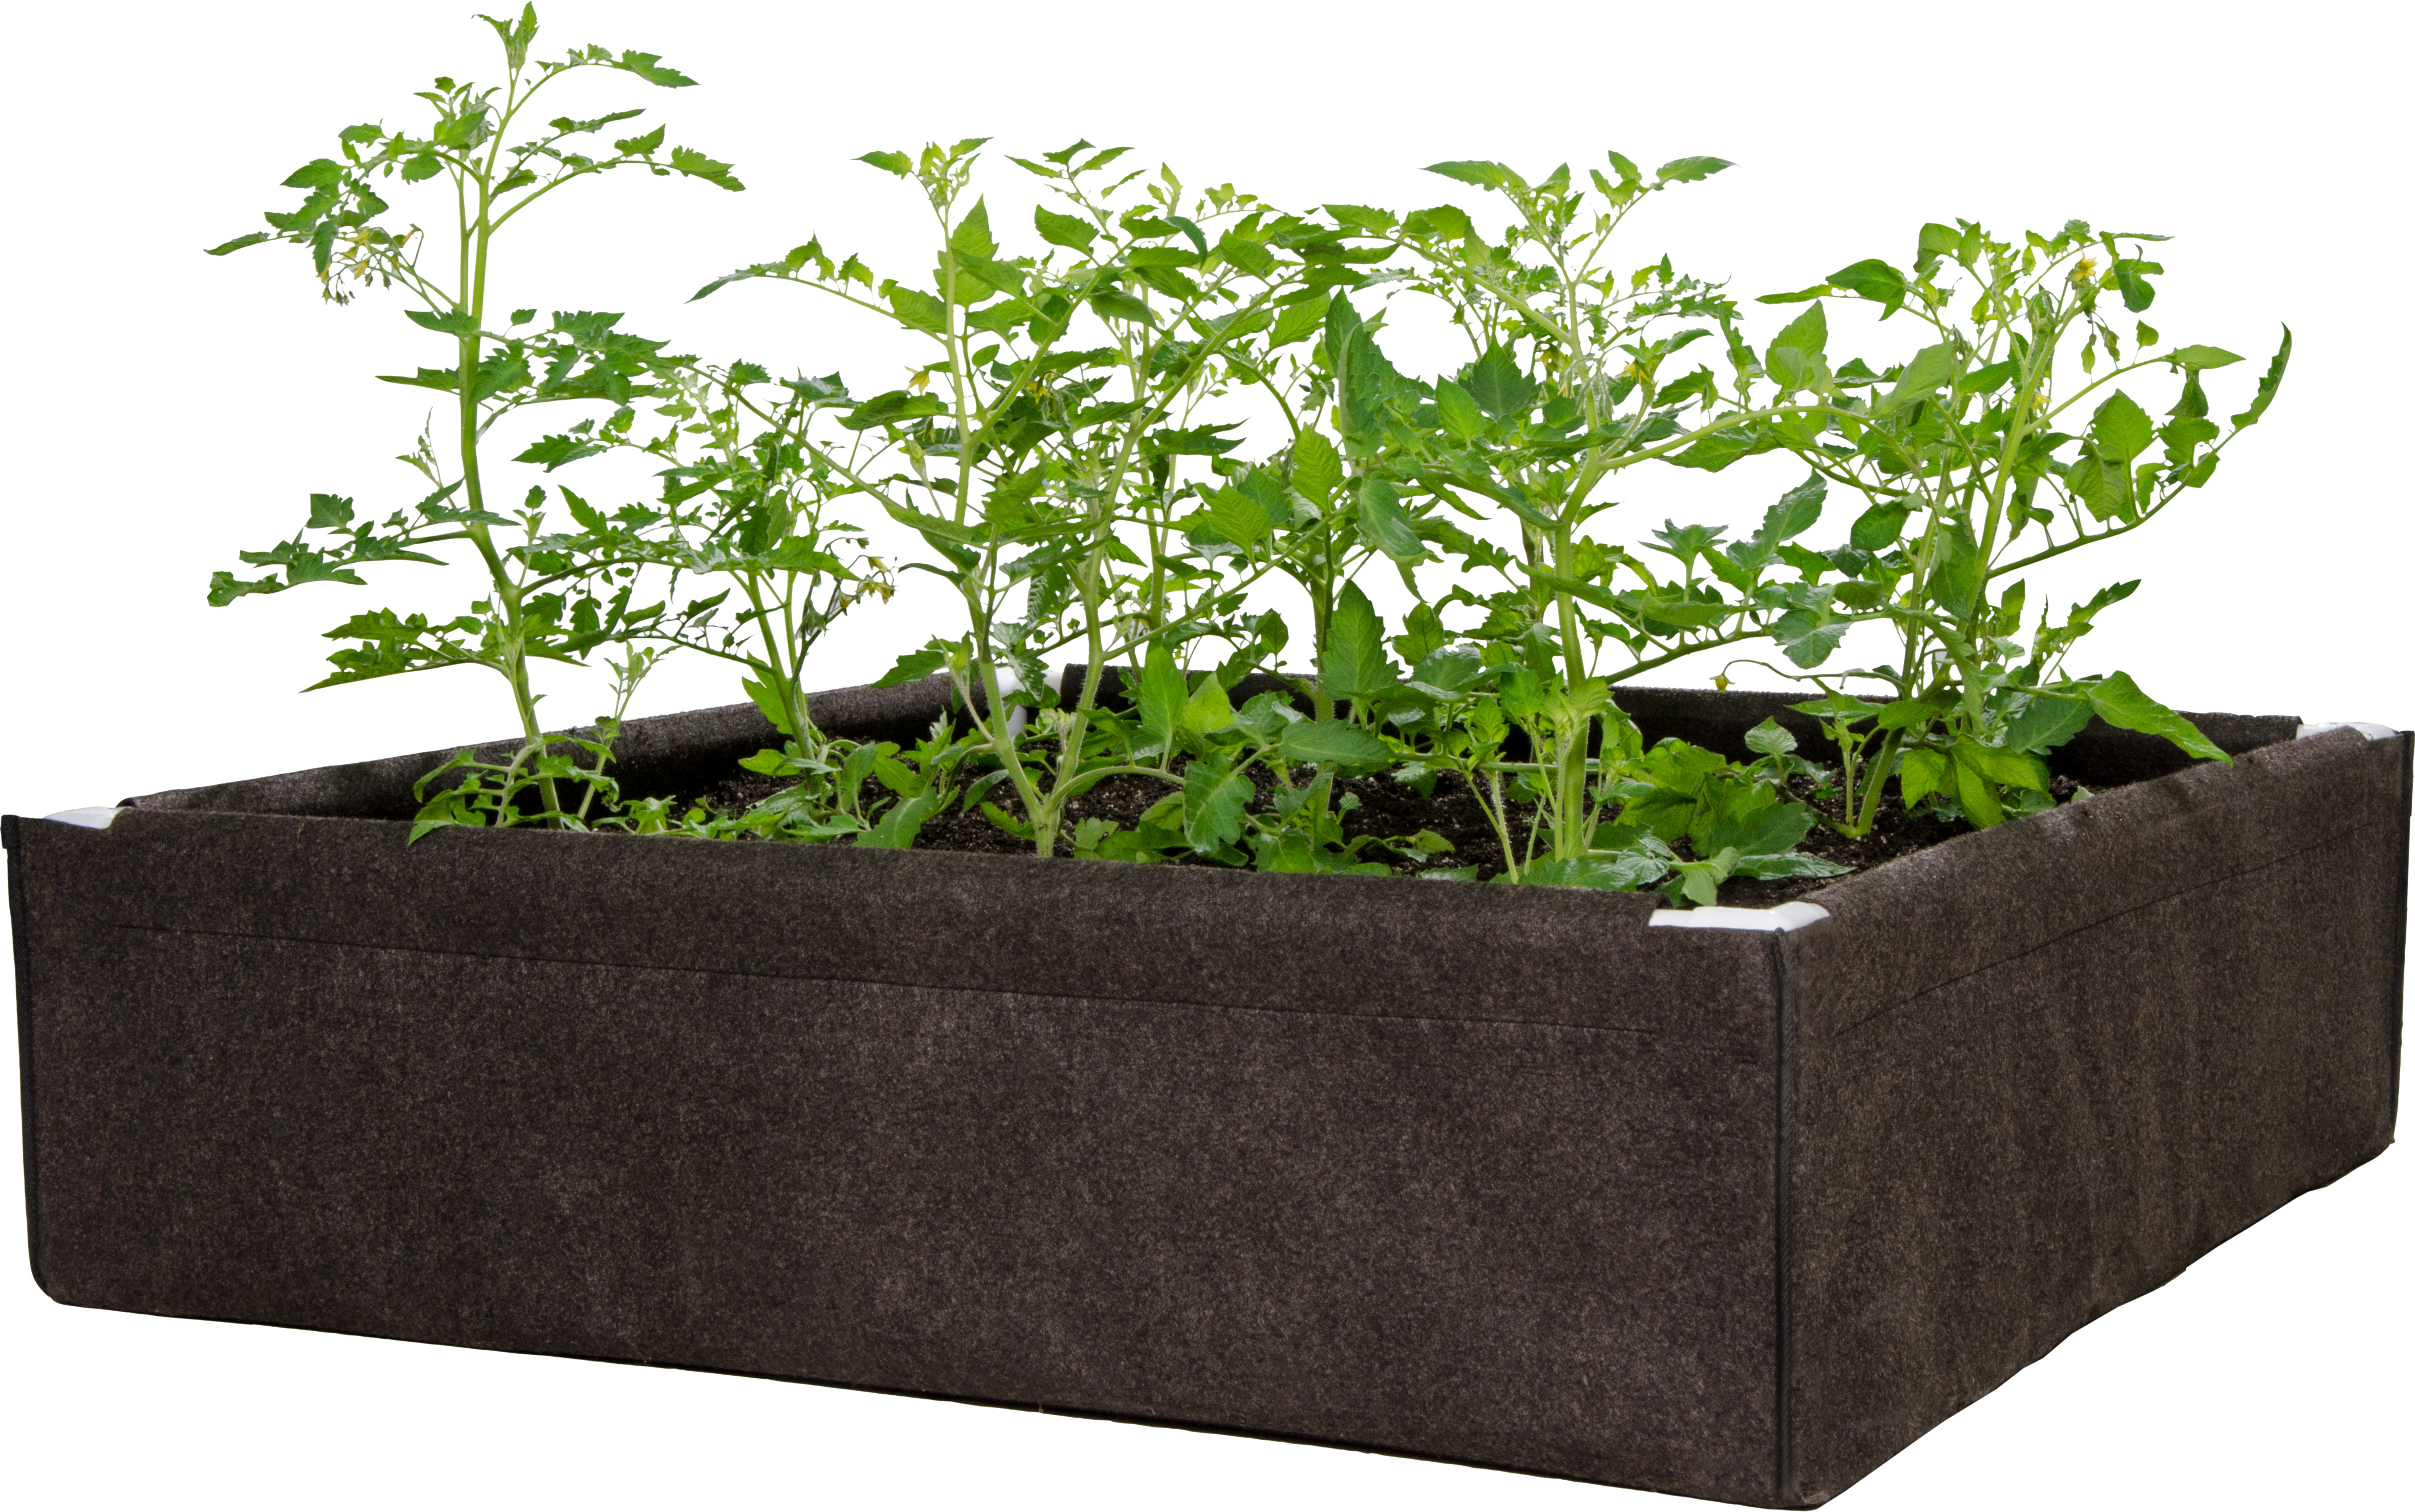 Picture for Dirt Pot Box, 3' x 3' Raised Bed